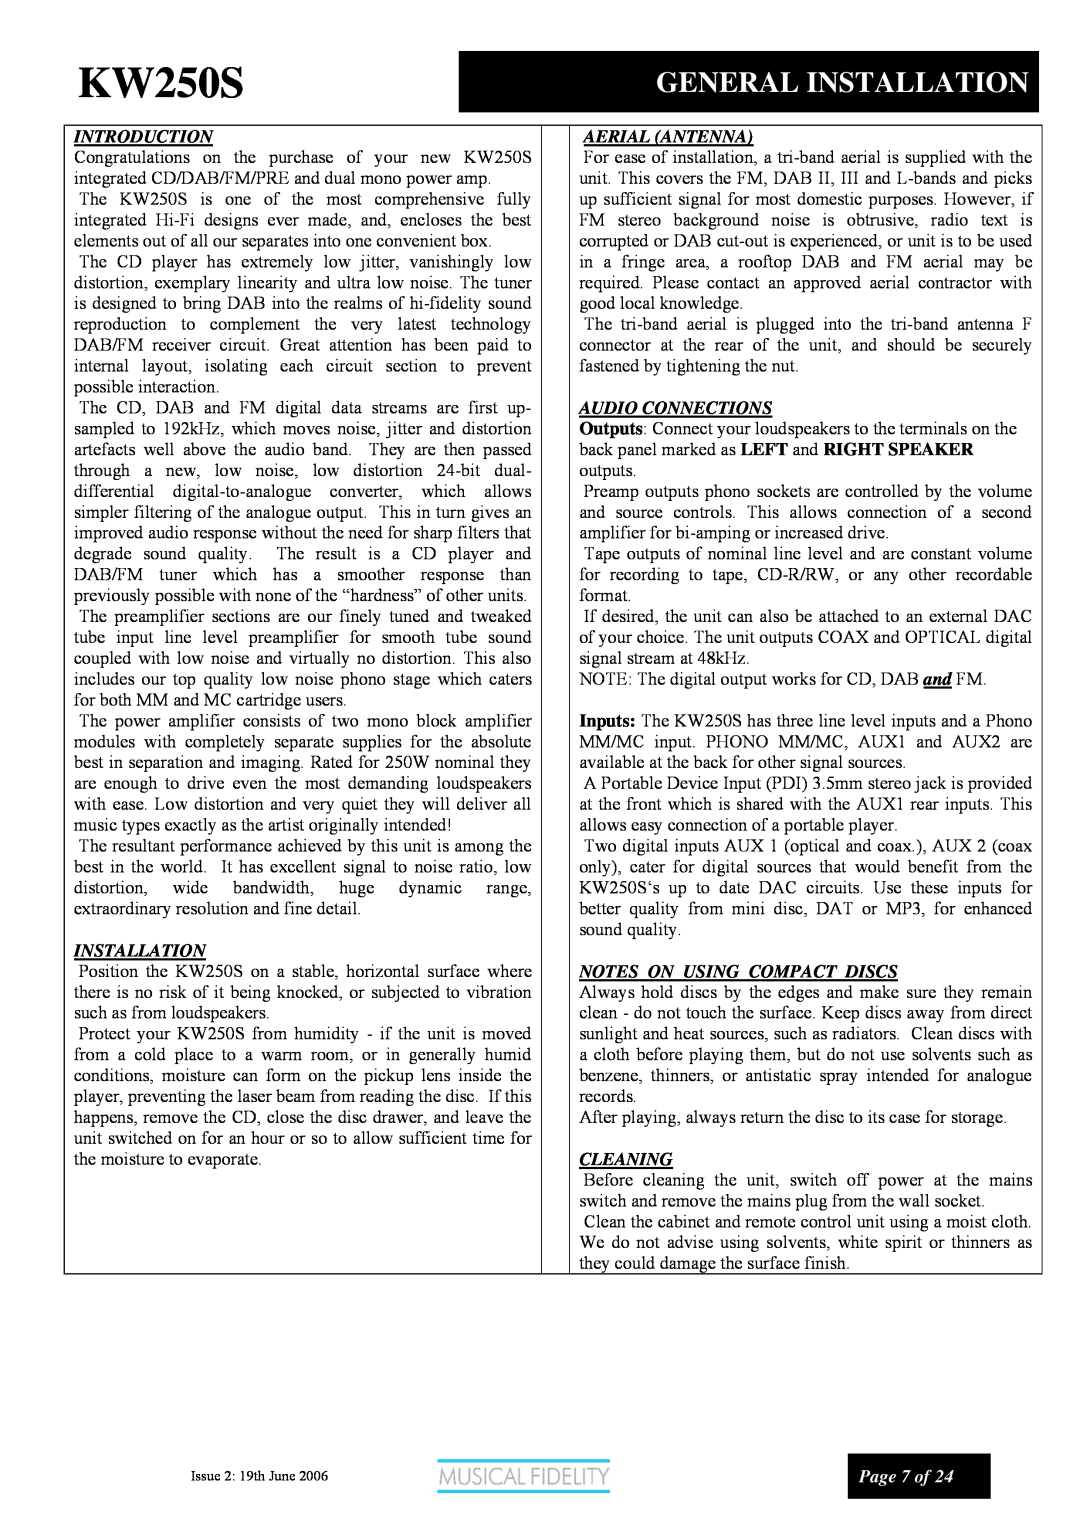 Musical Fidelity KW250S manual General Installation, Introduction, Aerial Antenna, Audio Connections, Cleaning, Page 7 of 